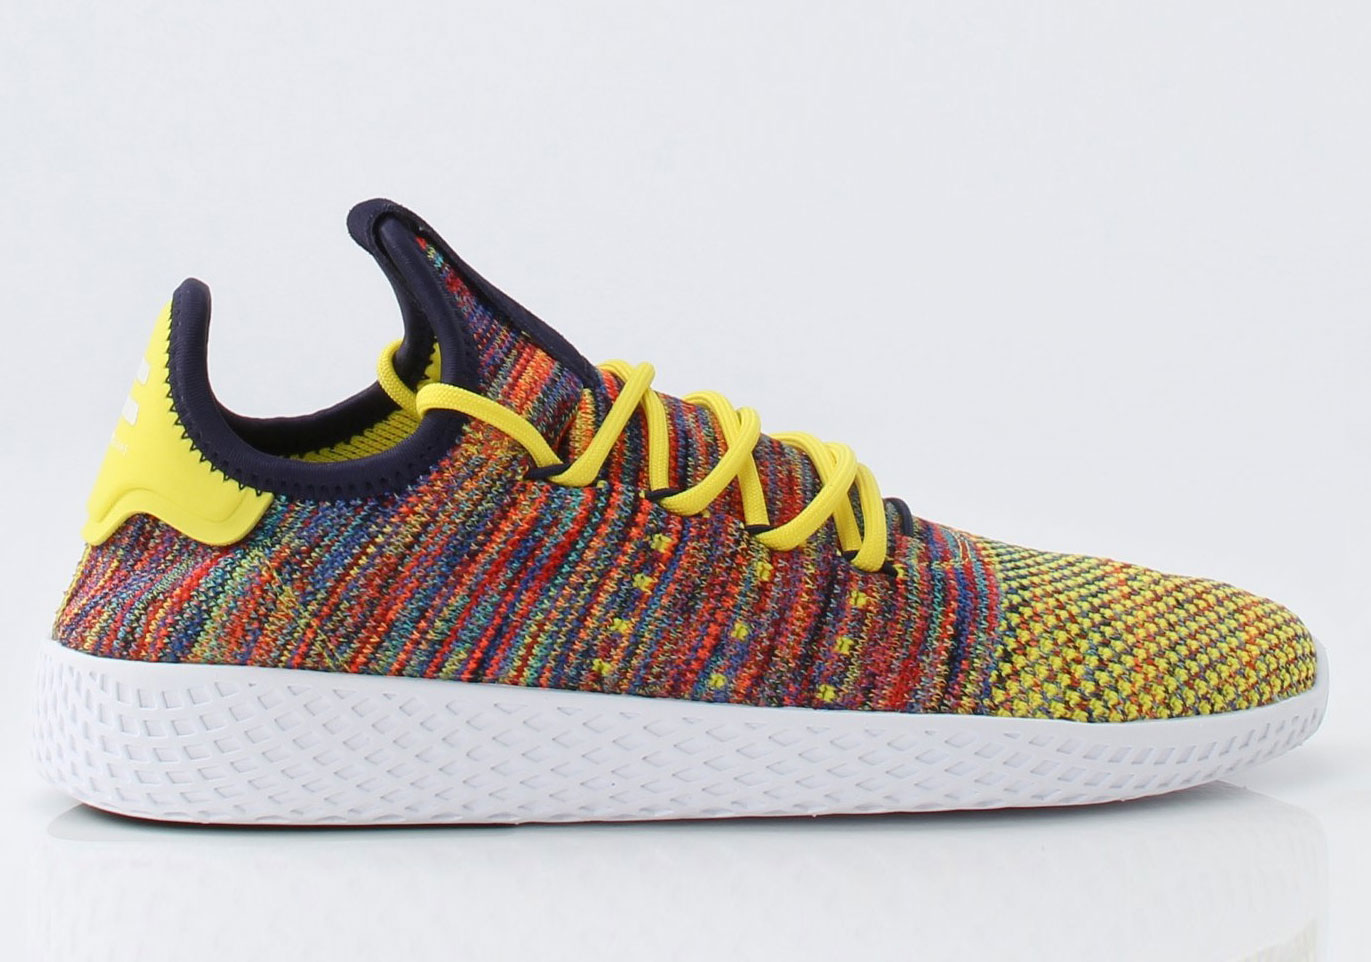 Pharrell x adidas Tennis Hu Summer 2017 Release Date Price $130 Style Code: BY2671 (Light Blue) Style Code: BY2672 (Tan) Style Code: BY2673 (Multi-color) Style Code: CQ1872 (Teal)